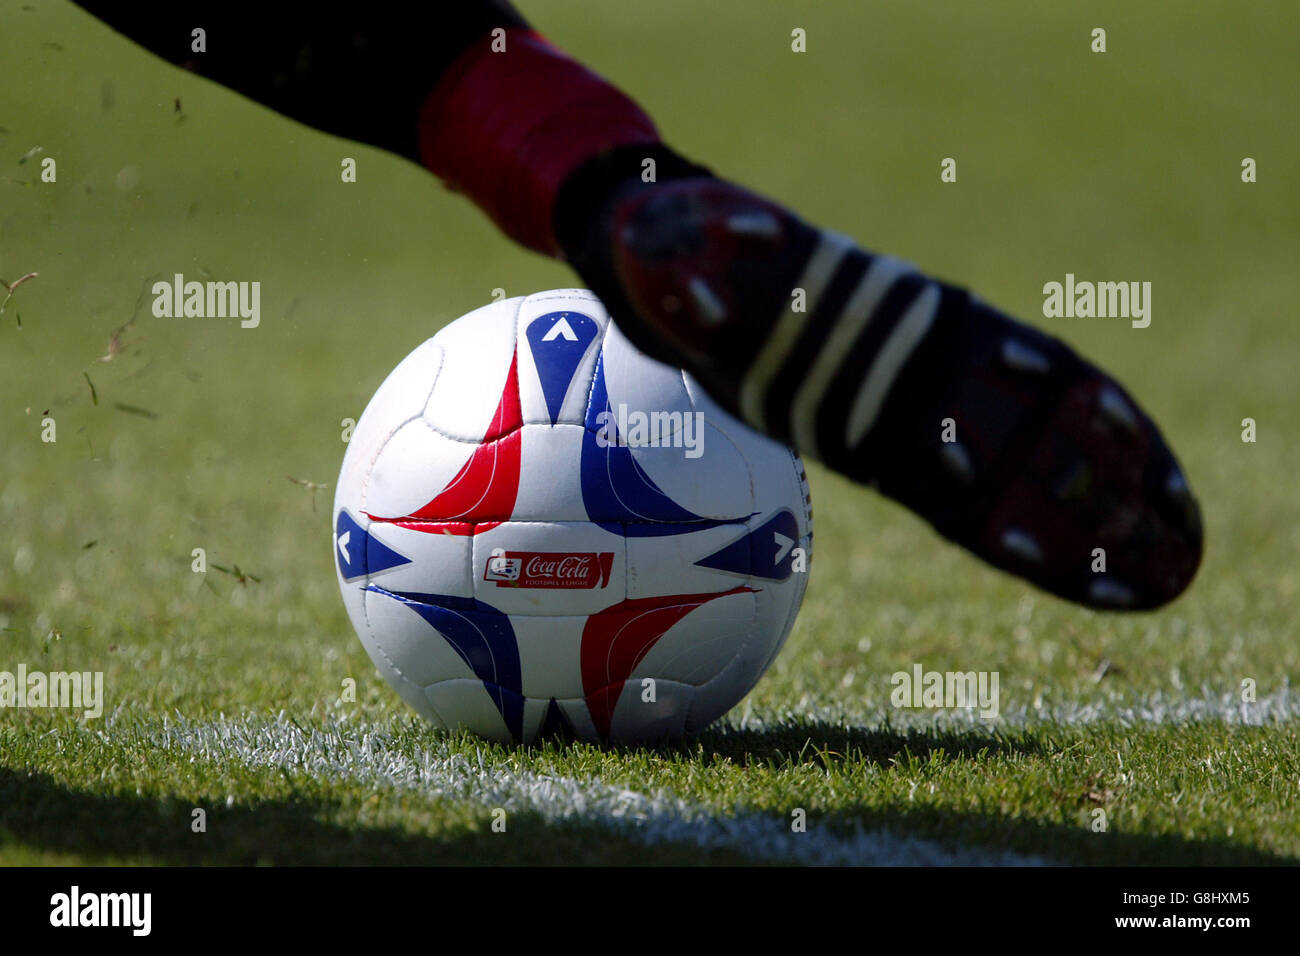 Soccer - Friendly - Doncaster Rovers v Peterborough United - Earth Stadium. Mitre football league ball Stock Photo